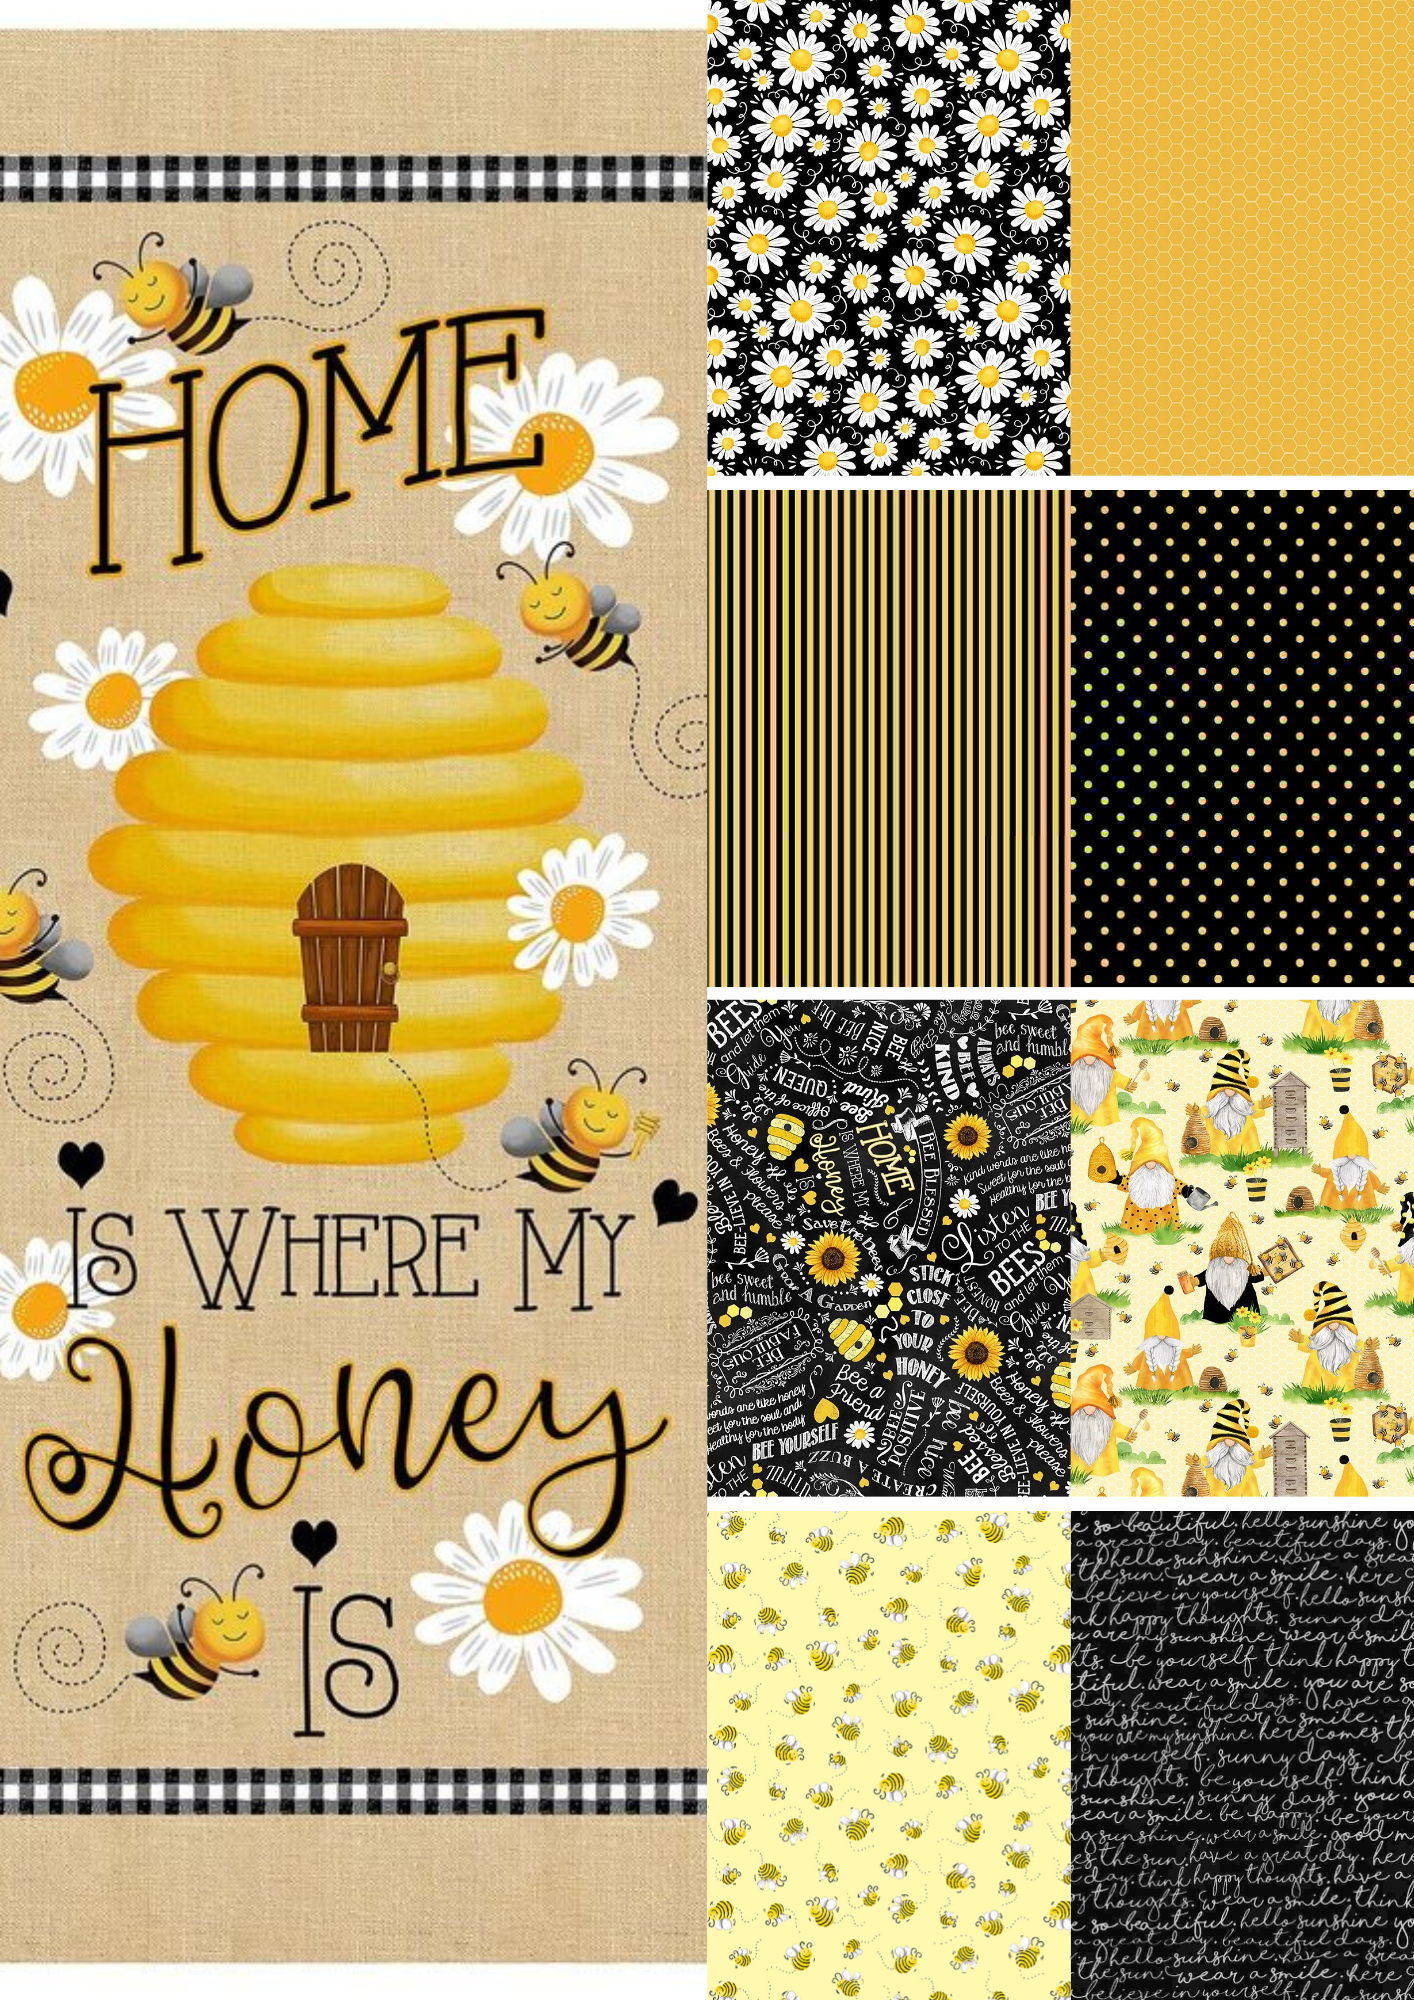 Timeless Treasures Quilt Kit Beginner Bee Hive Quilt Kit Timeless Treasures Home Is Where My Honey Is DIY Panel Quilt with Picture This Pattern